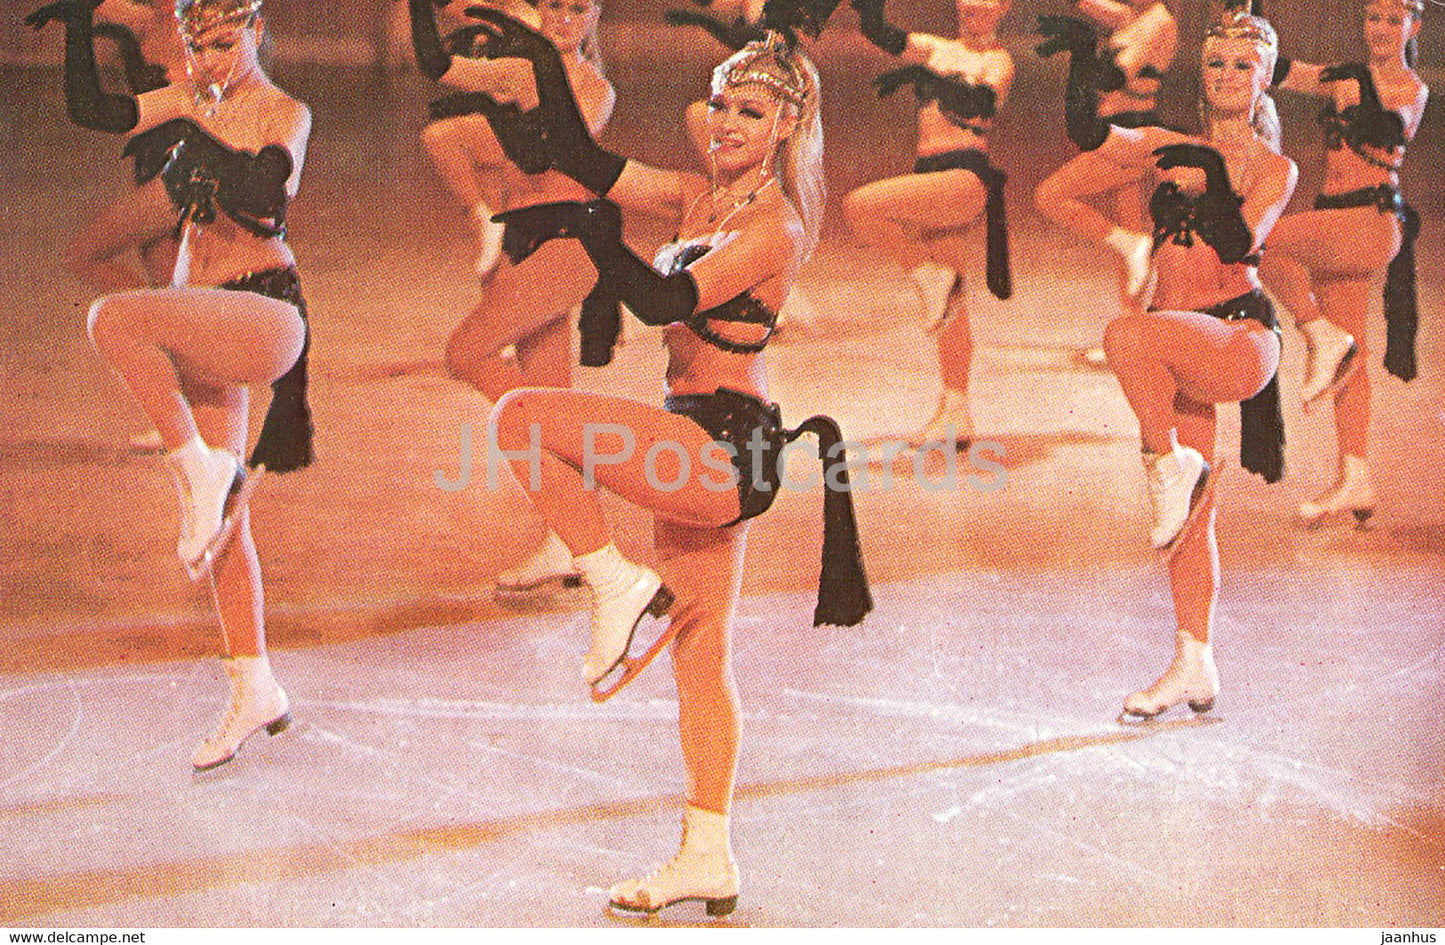 Moscow Ballet on Ice - Horses - figure skating - 1971 - Russia USSR - unused - JH Postcards